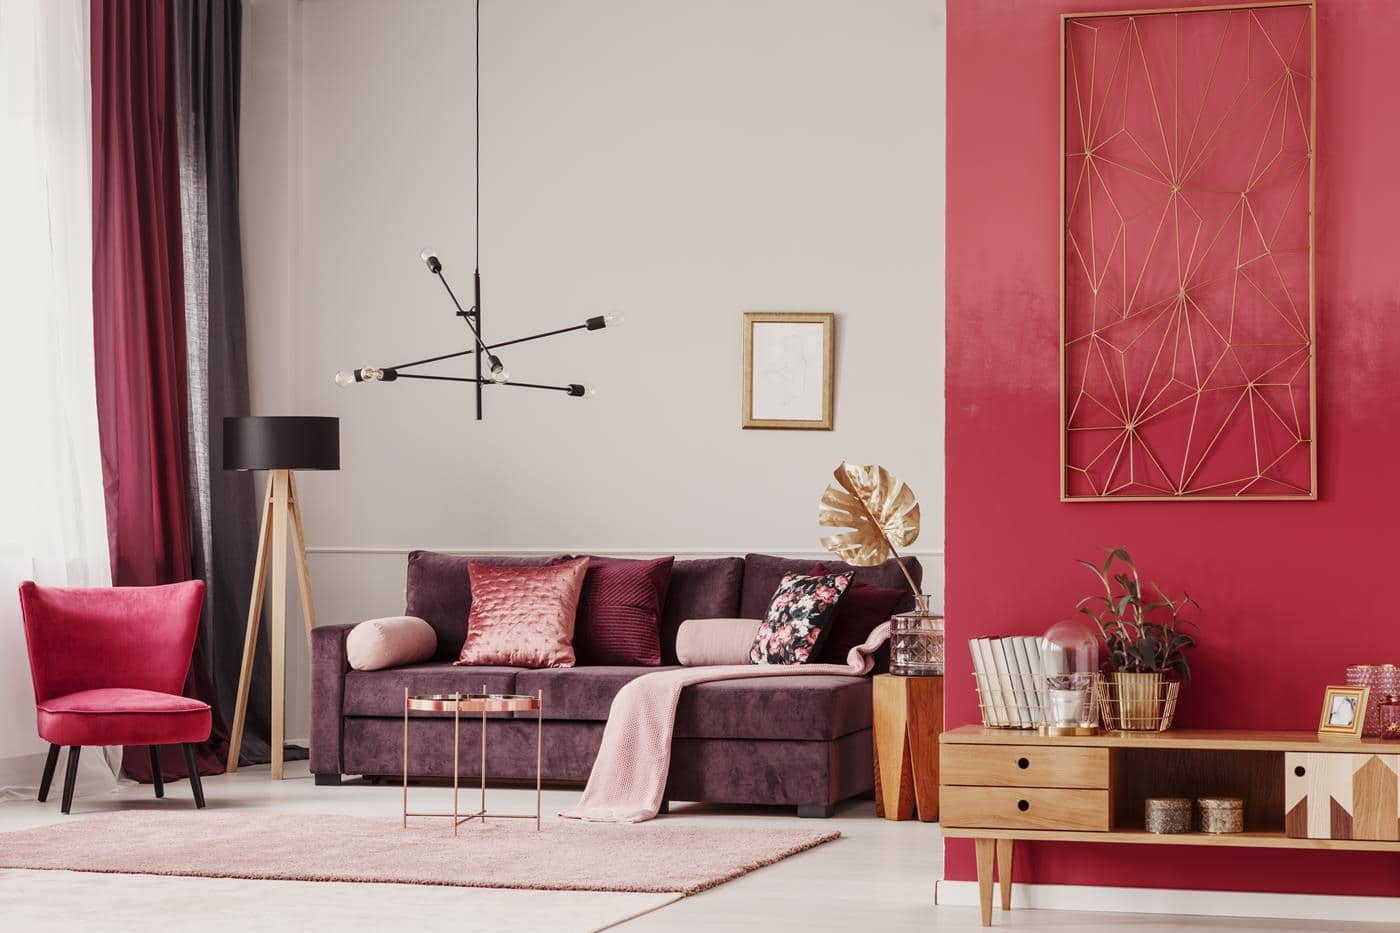 A living room with an amaranth red accent